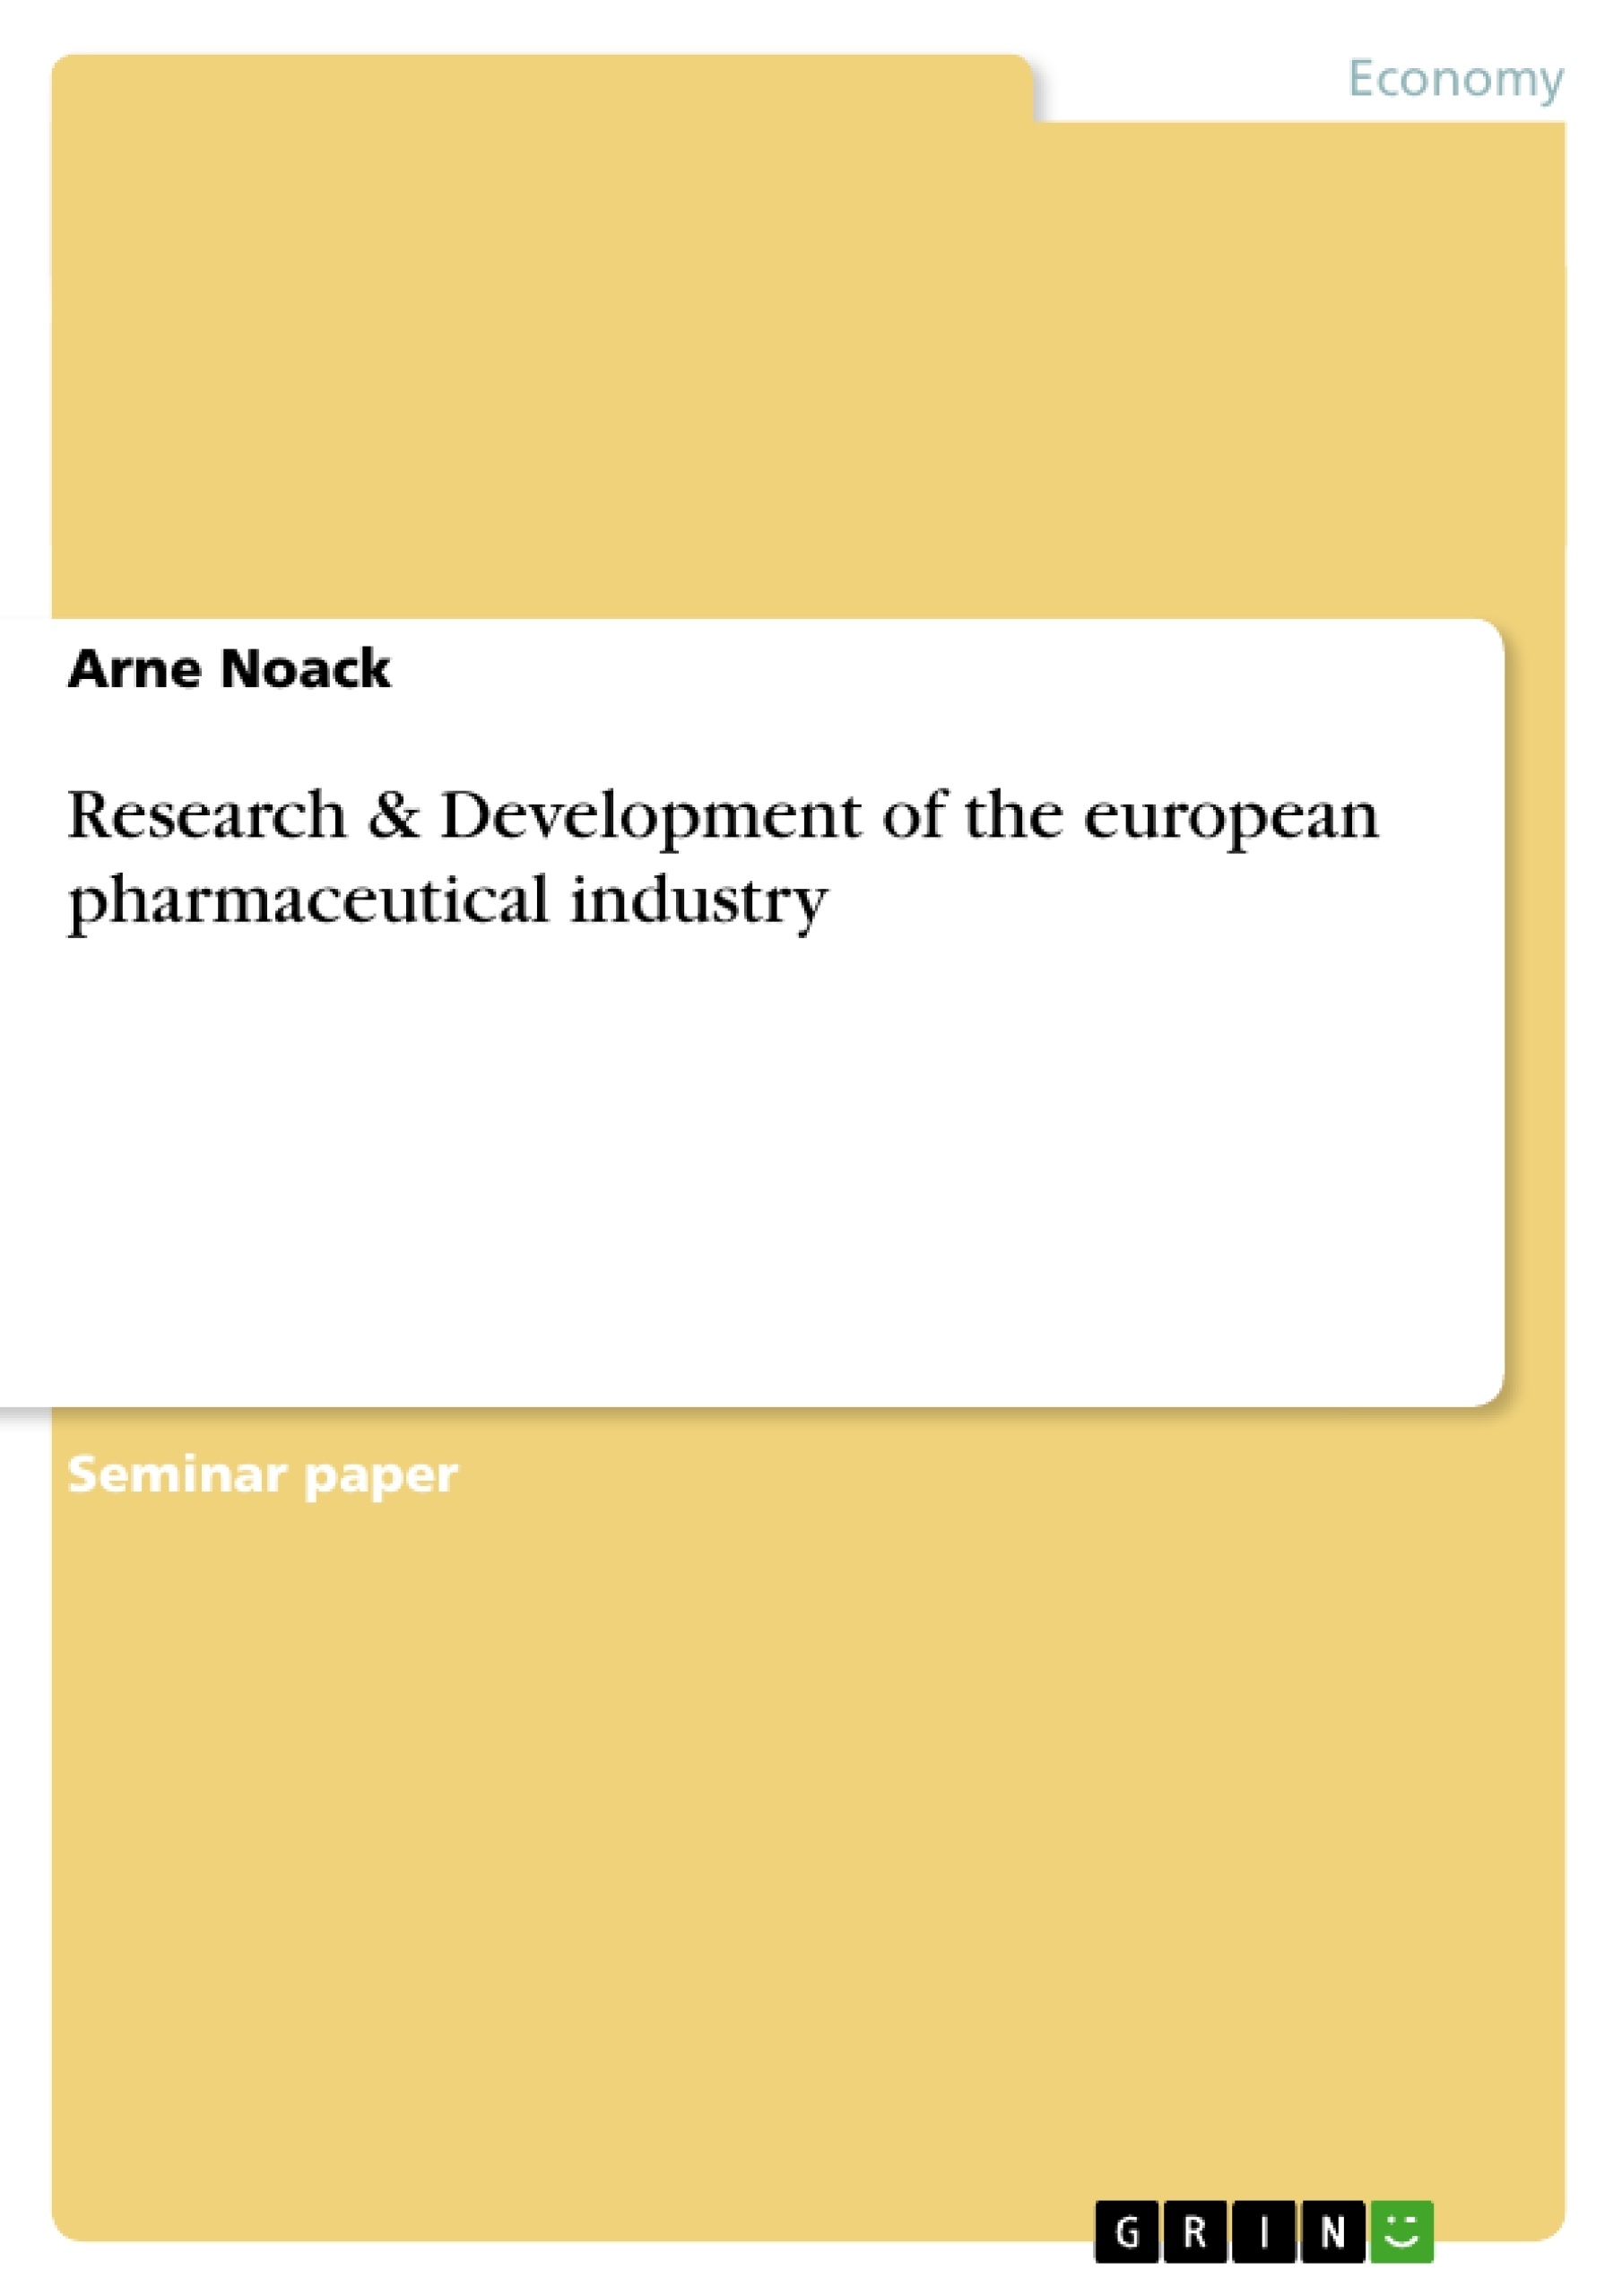 Título: Research & Development of the european pharmaceutical industry